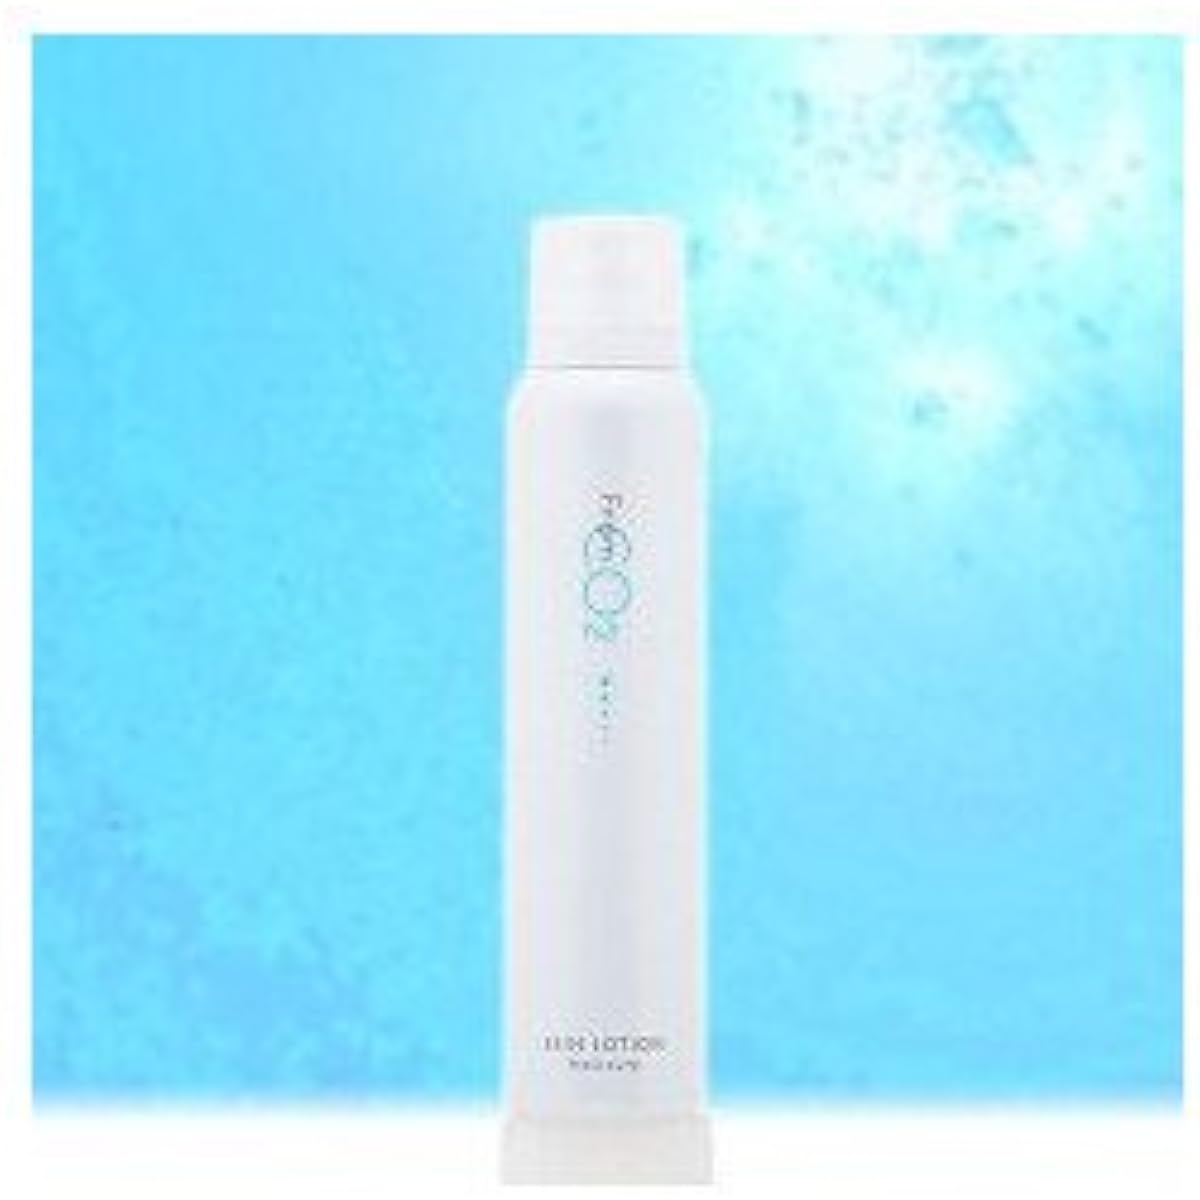 From CO2 Skin Lotion Moisture 150ml